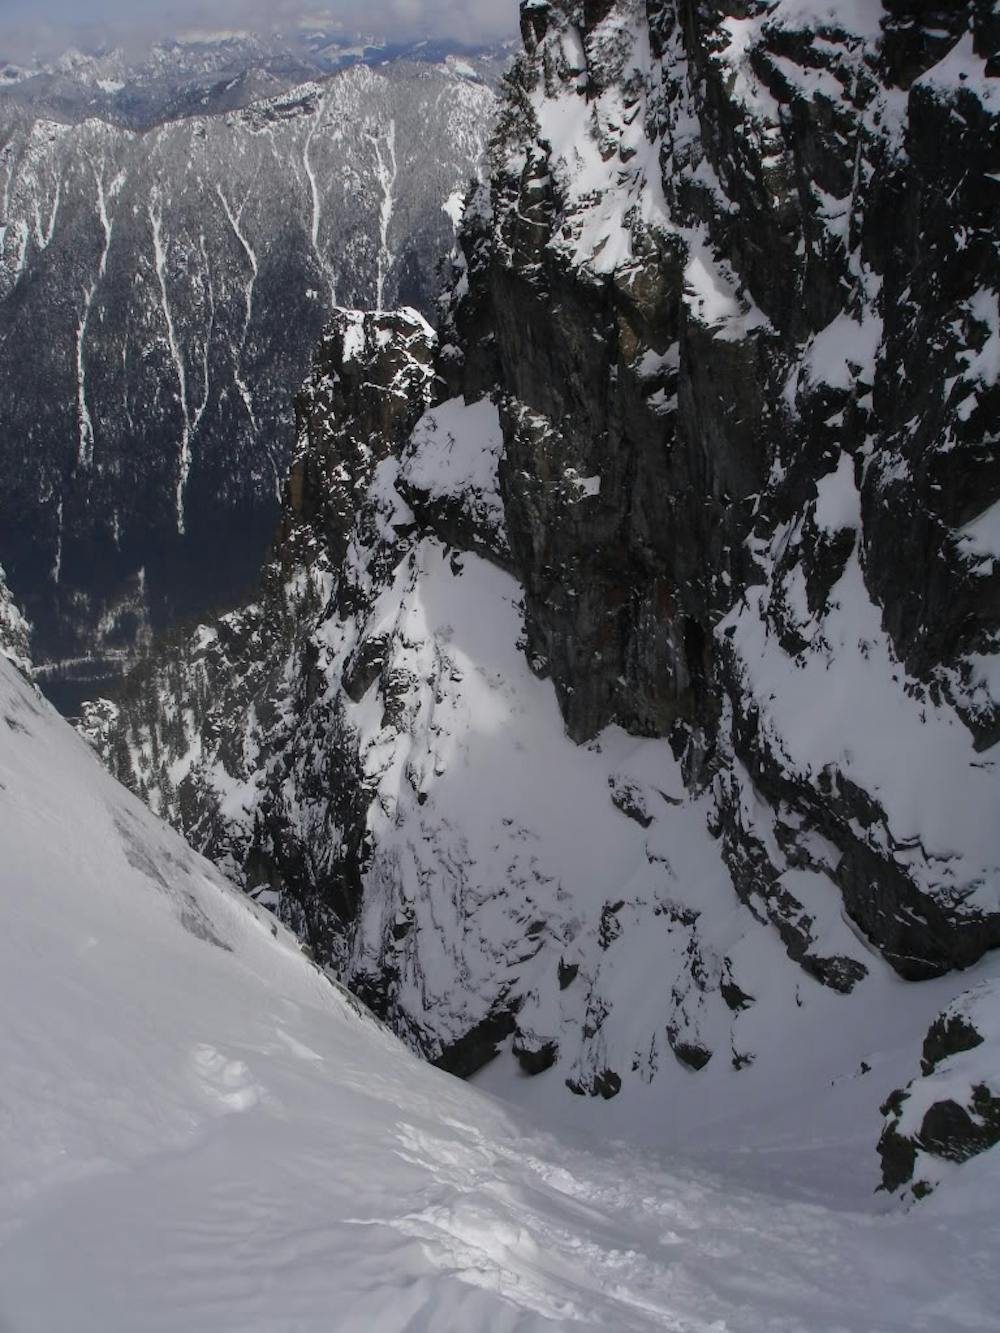 Looking into the Slot Couloir